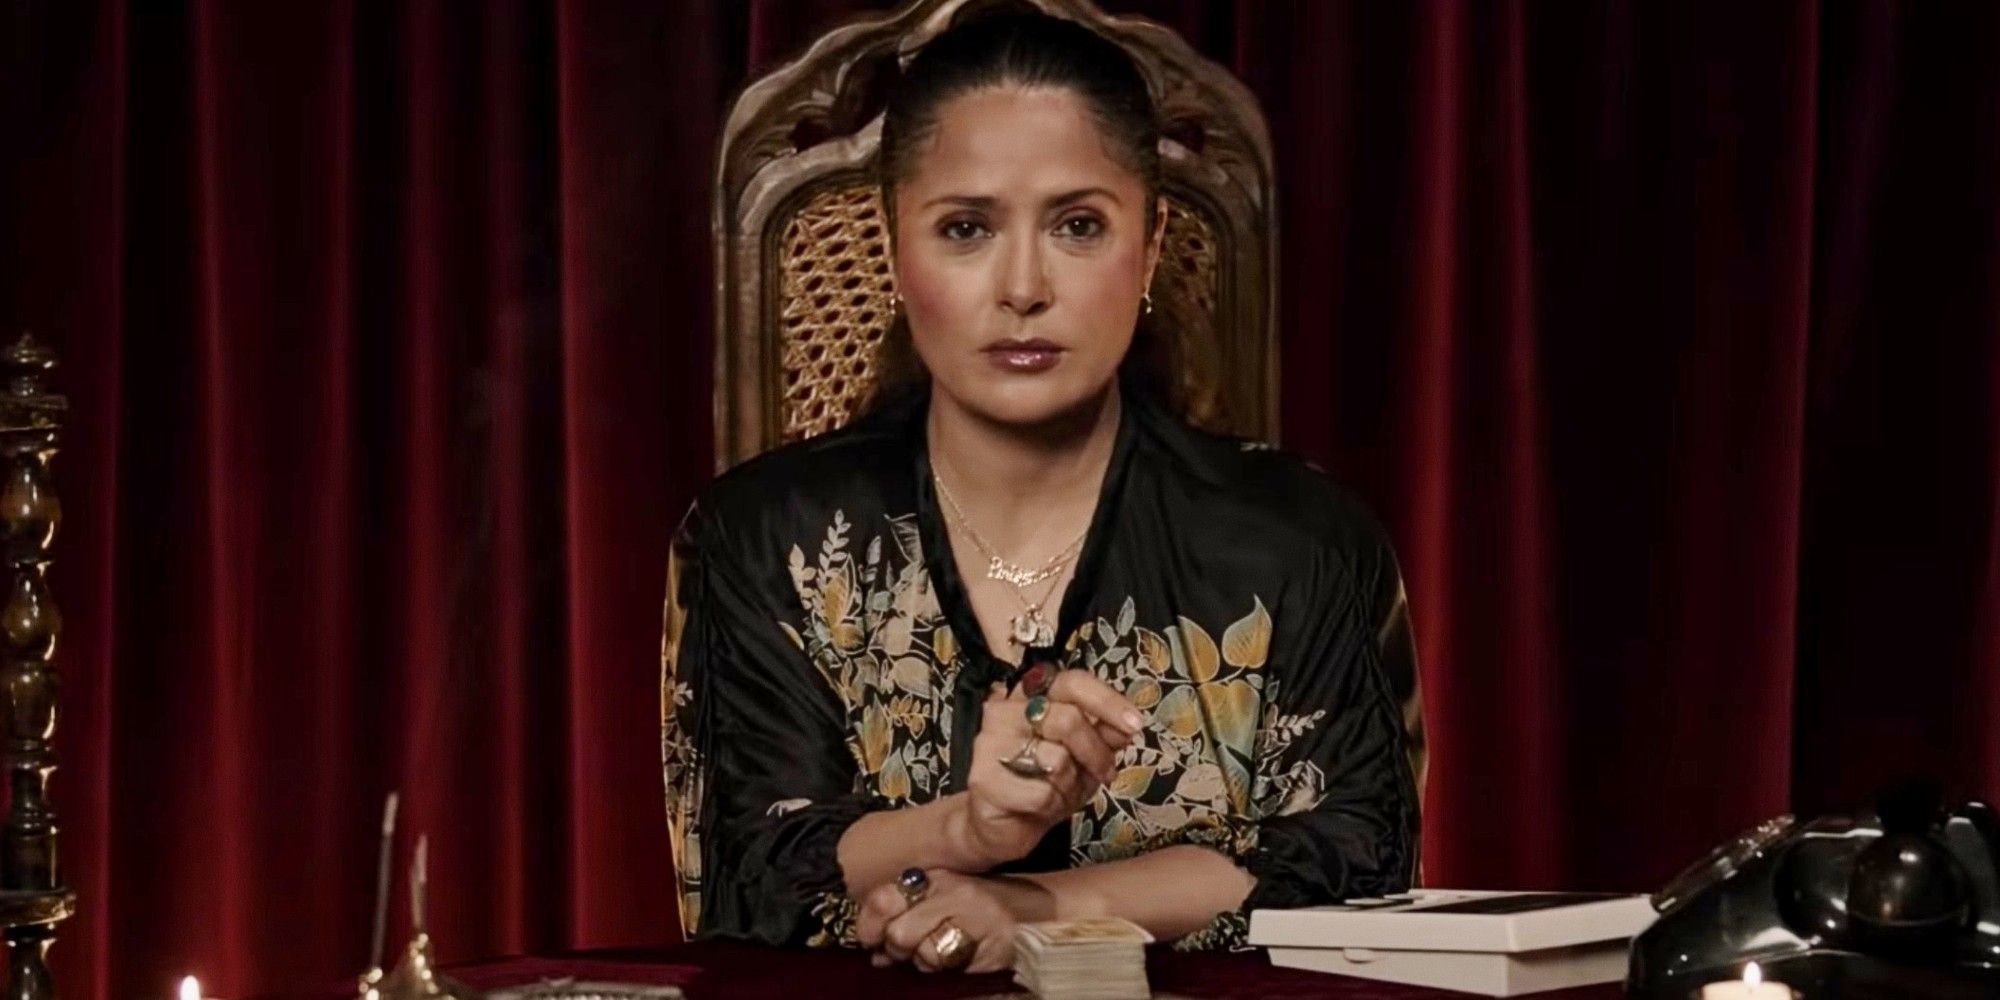 Salma Hayek as a television psychic in the House of Gucci